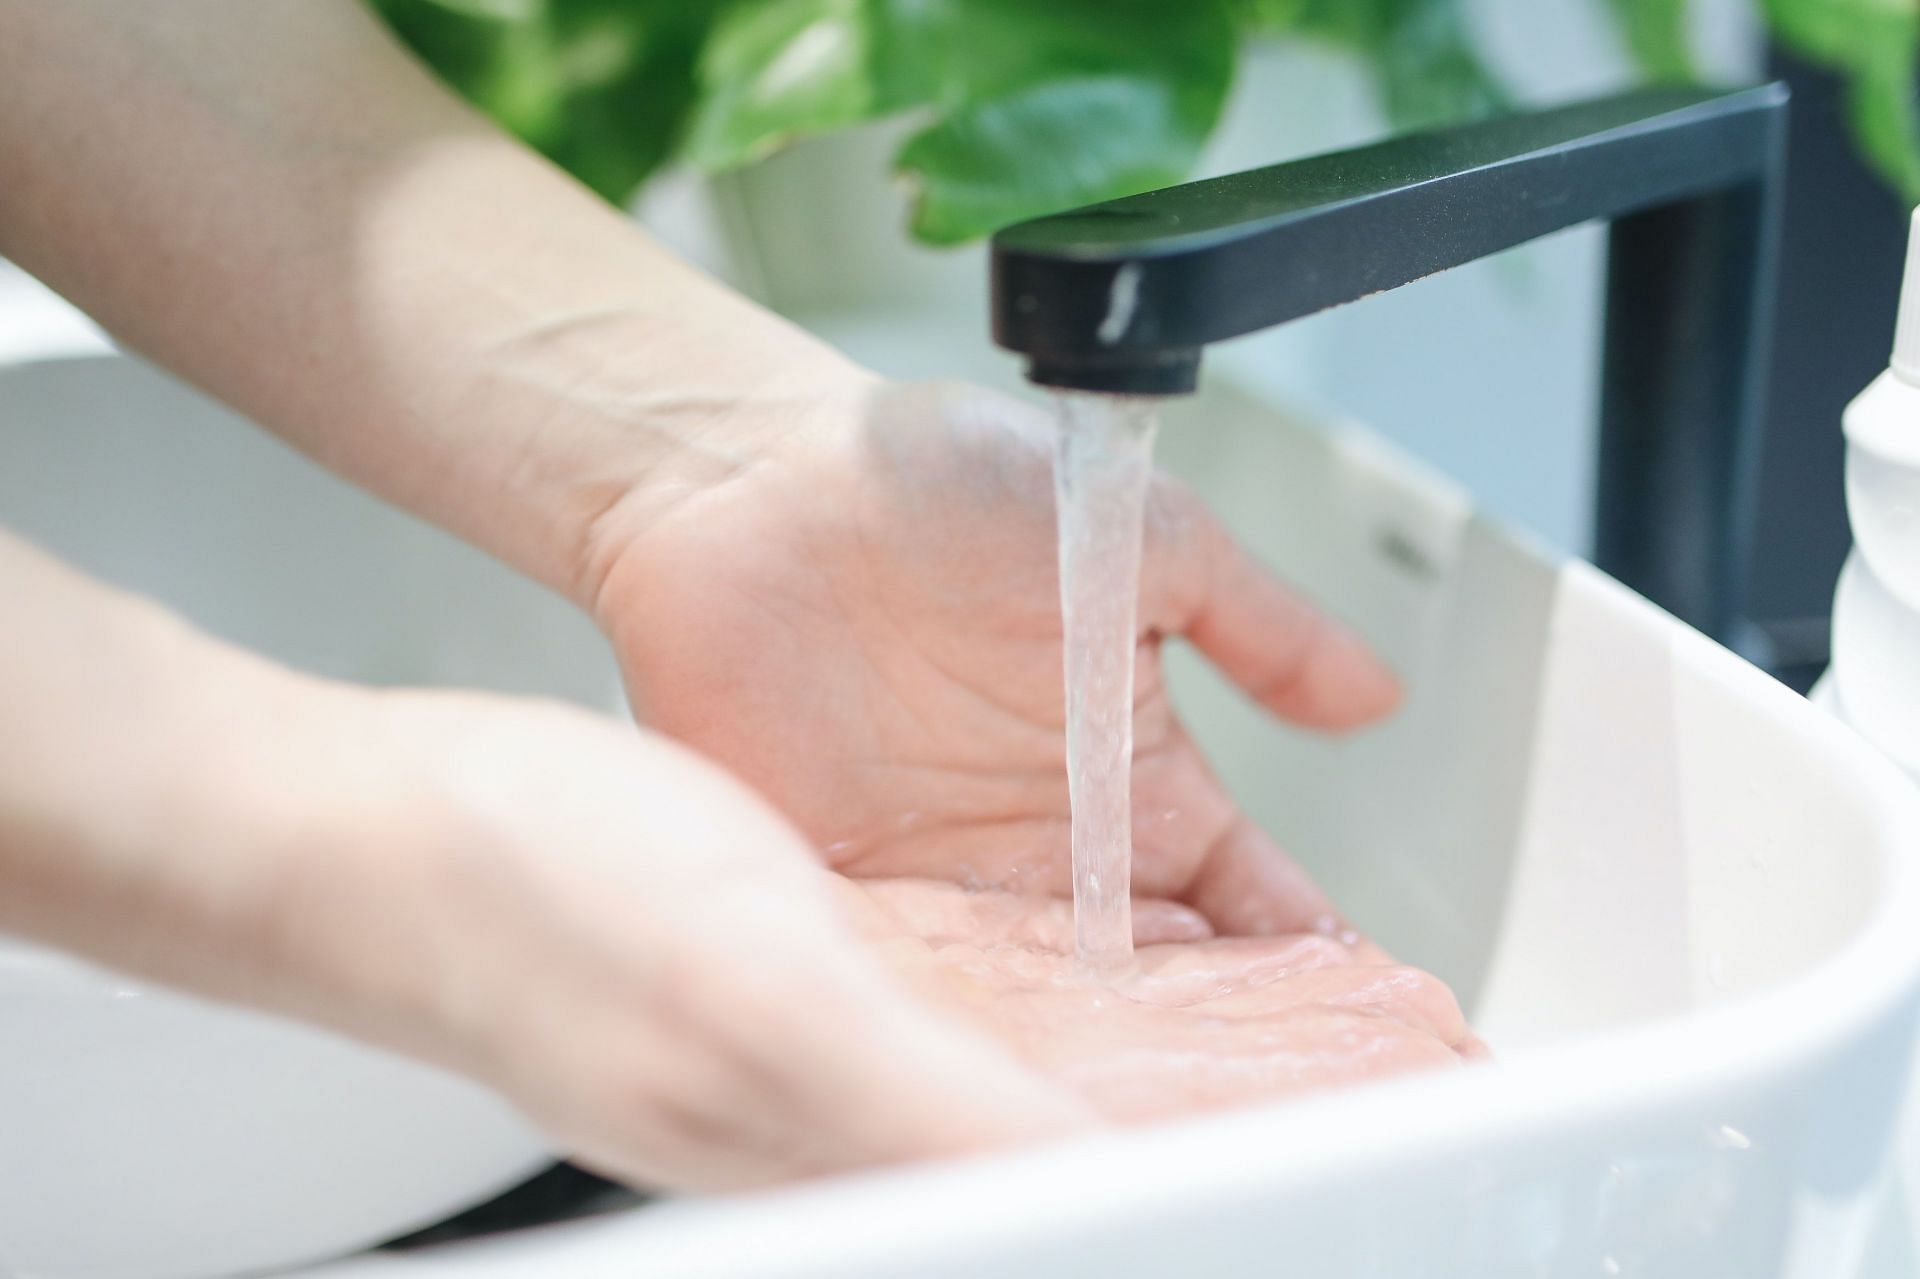 Keeping your hands clean can be helpful. (Image via Pexels / Polina Tankilevitch)